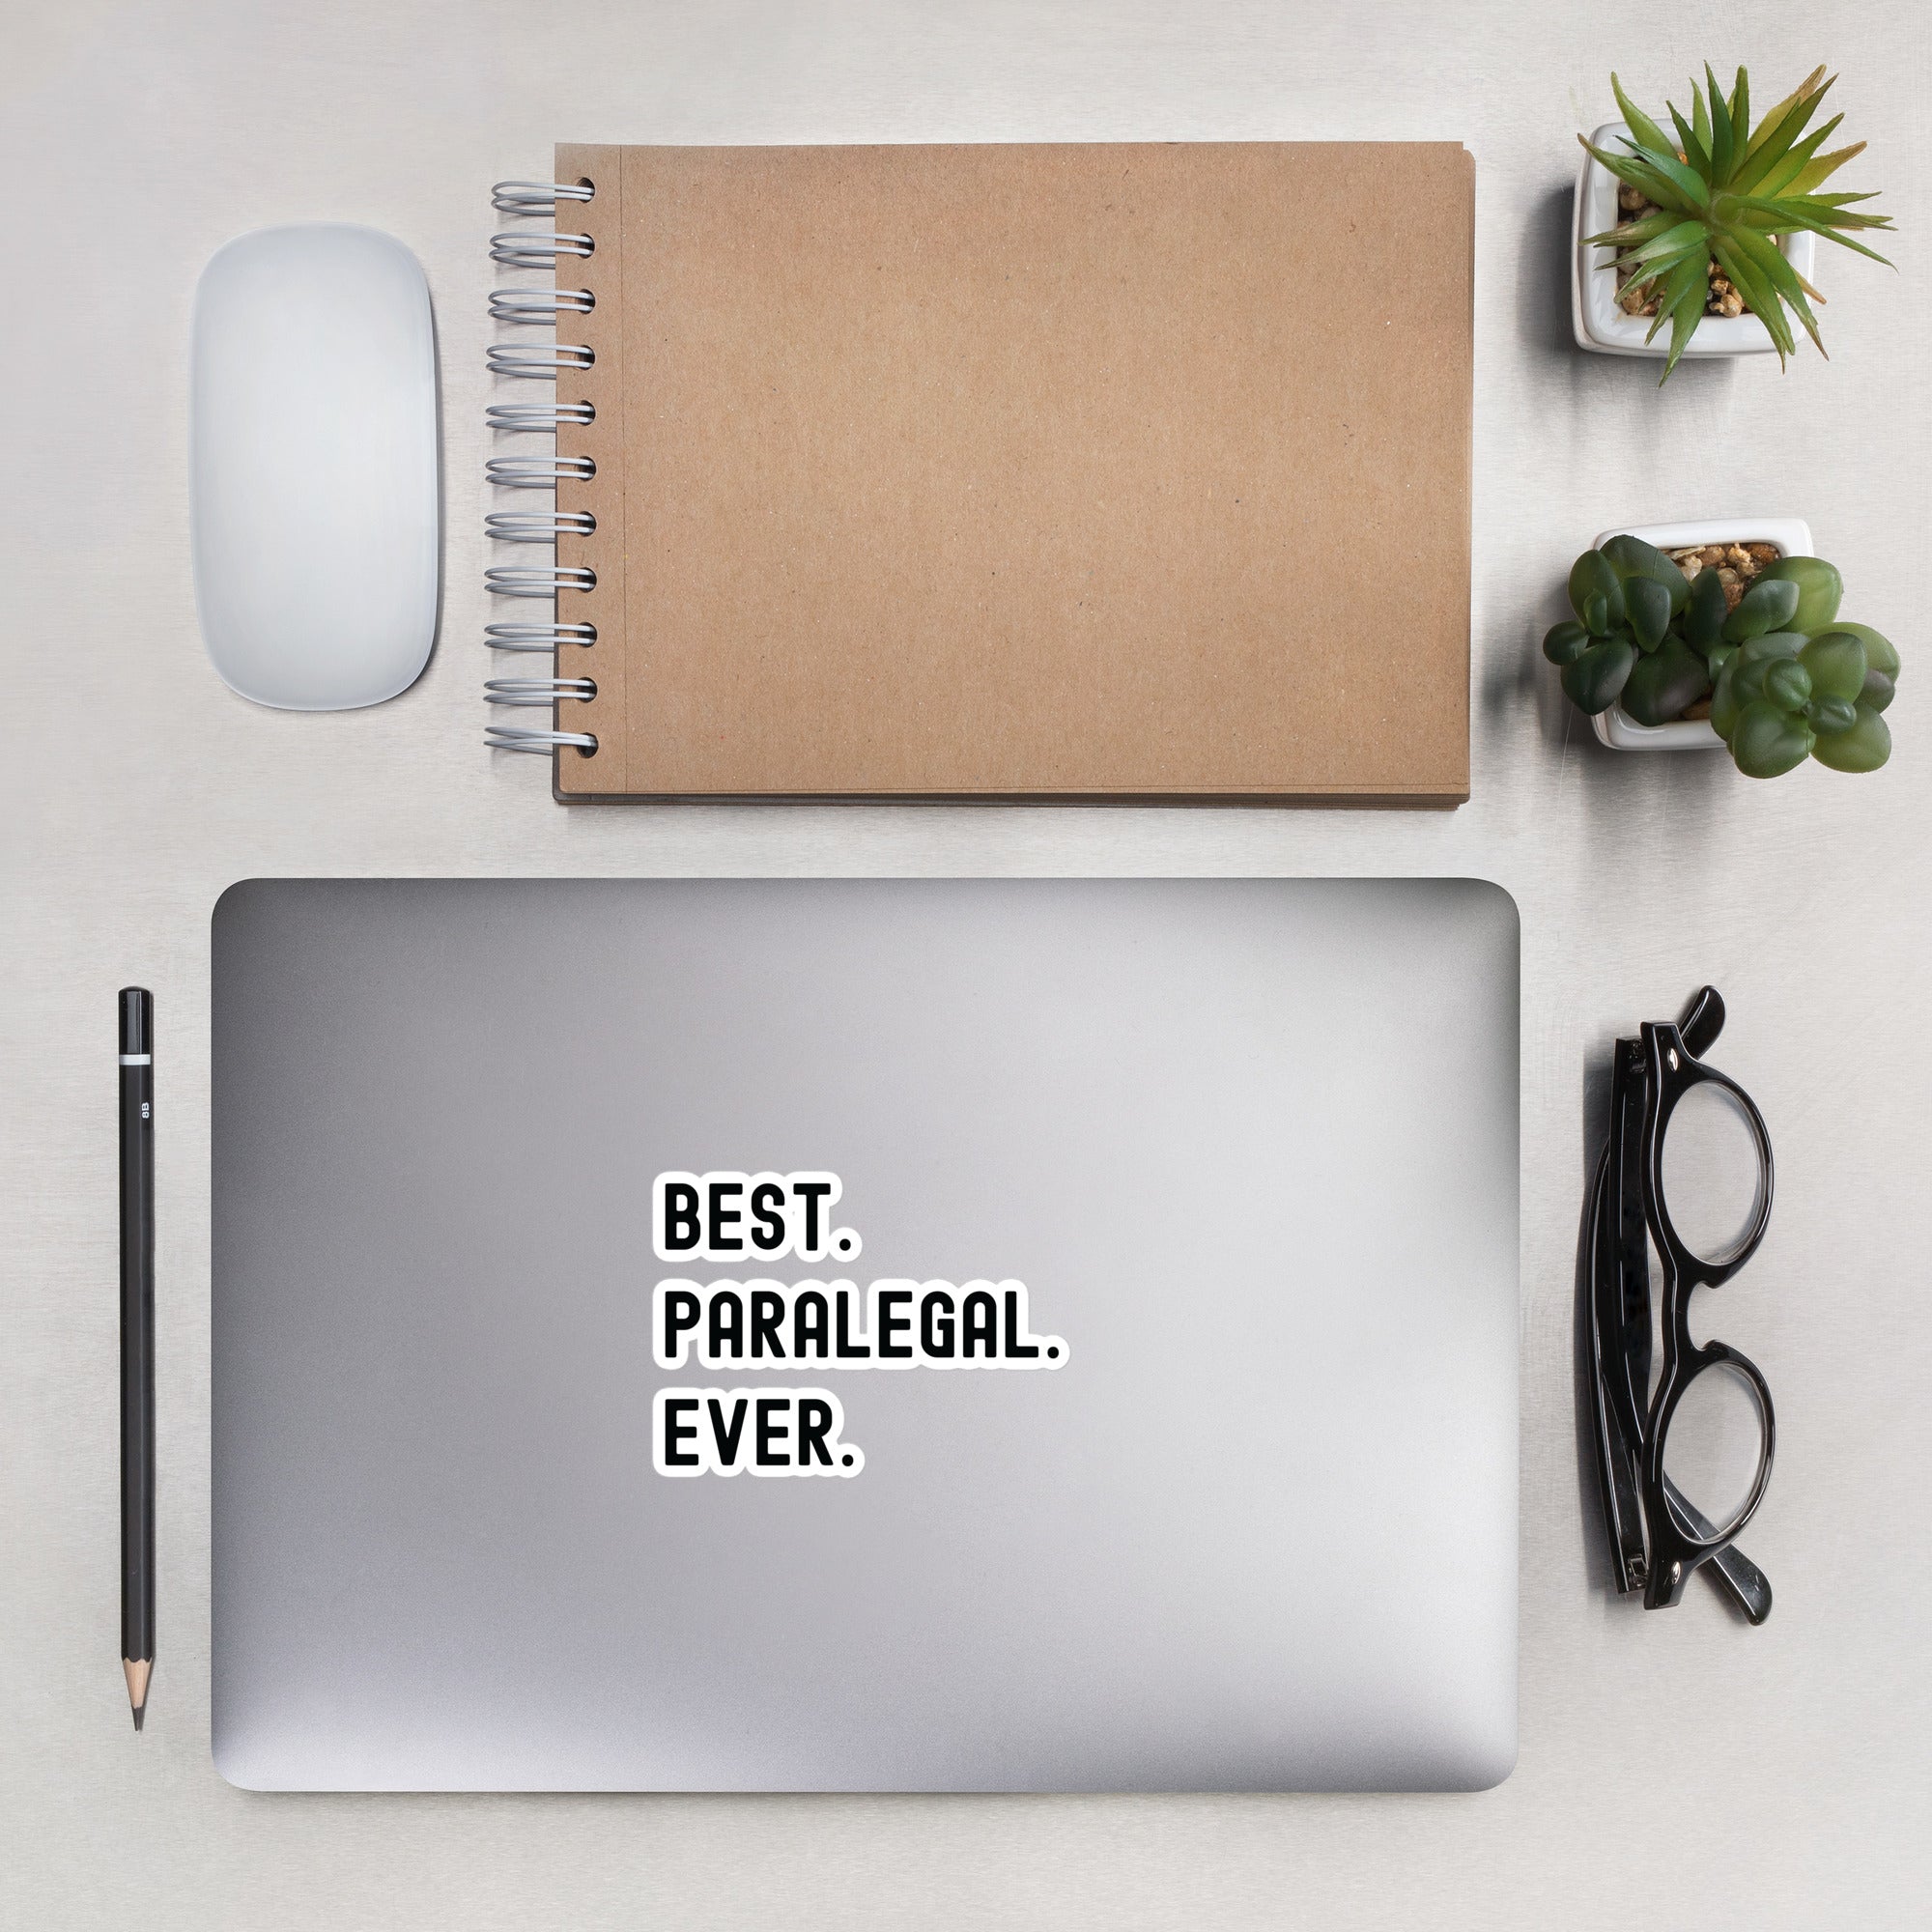 Bubble-free stickers | Best. Paralegal. Ever.